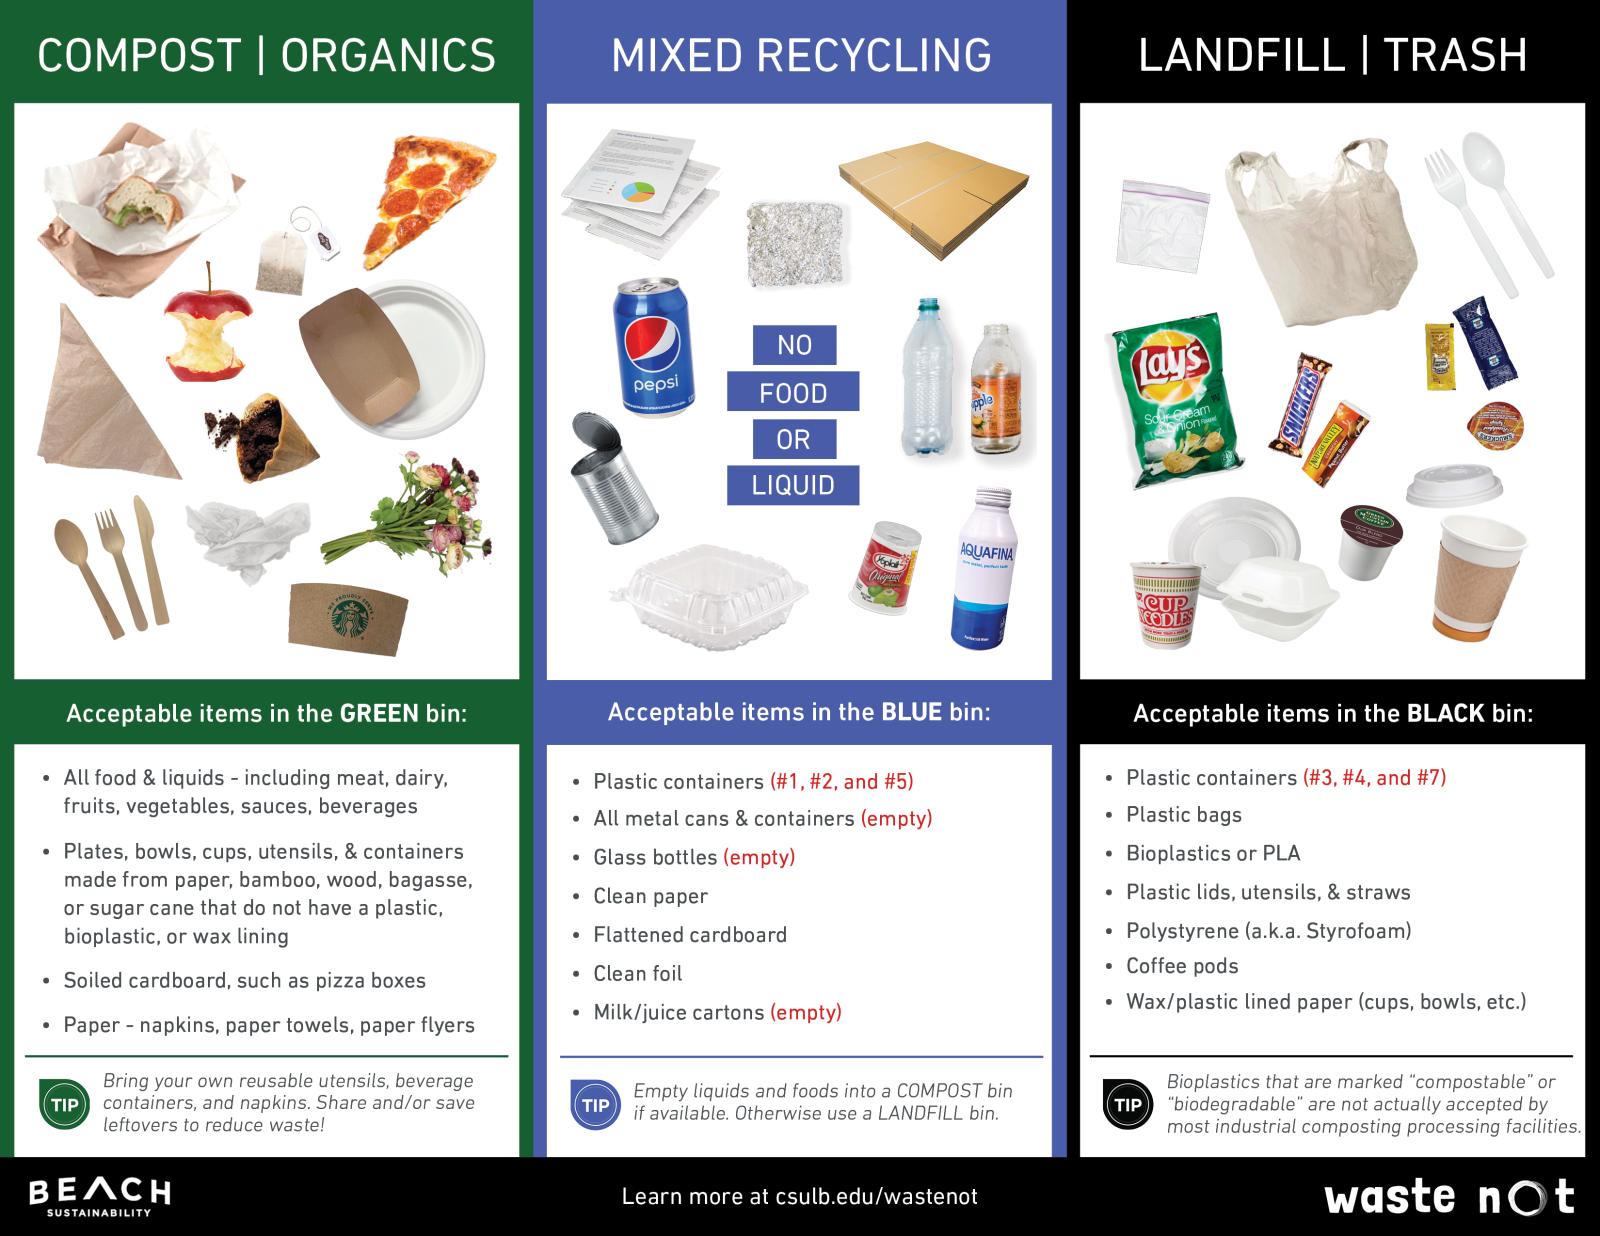 Waste sorting guide